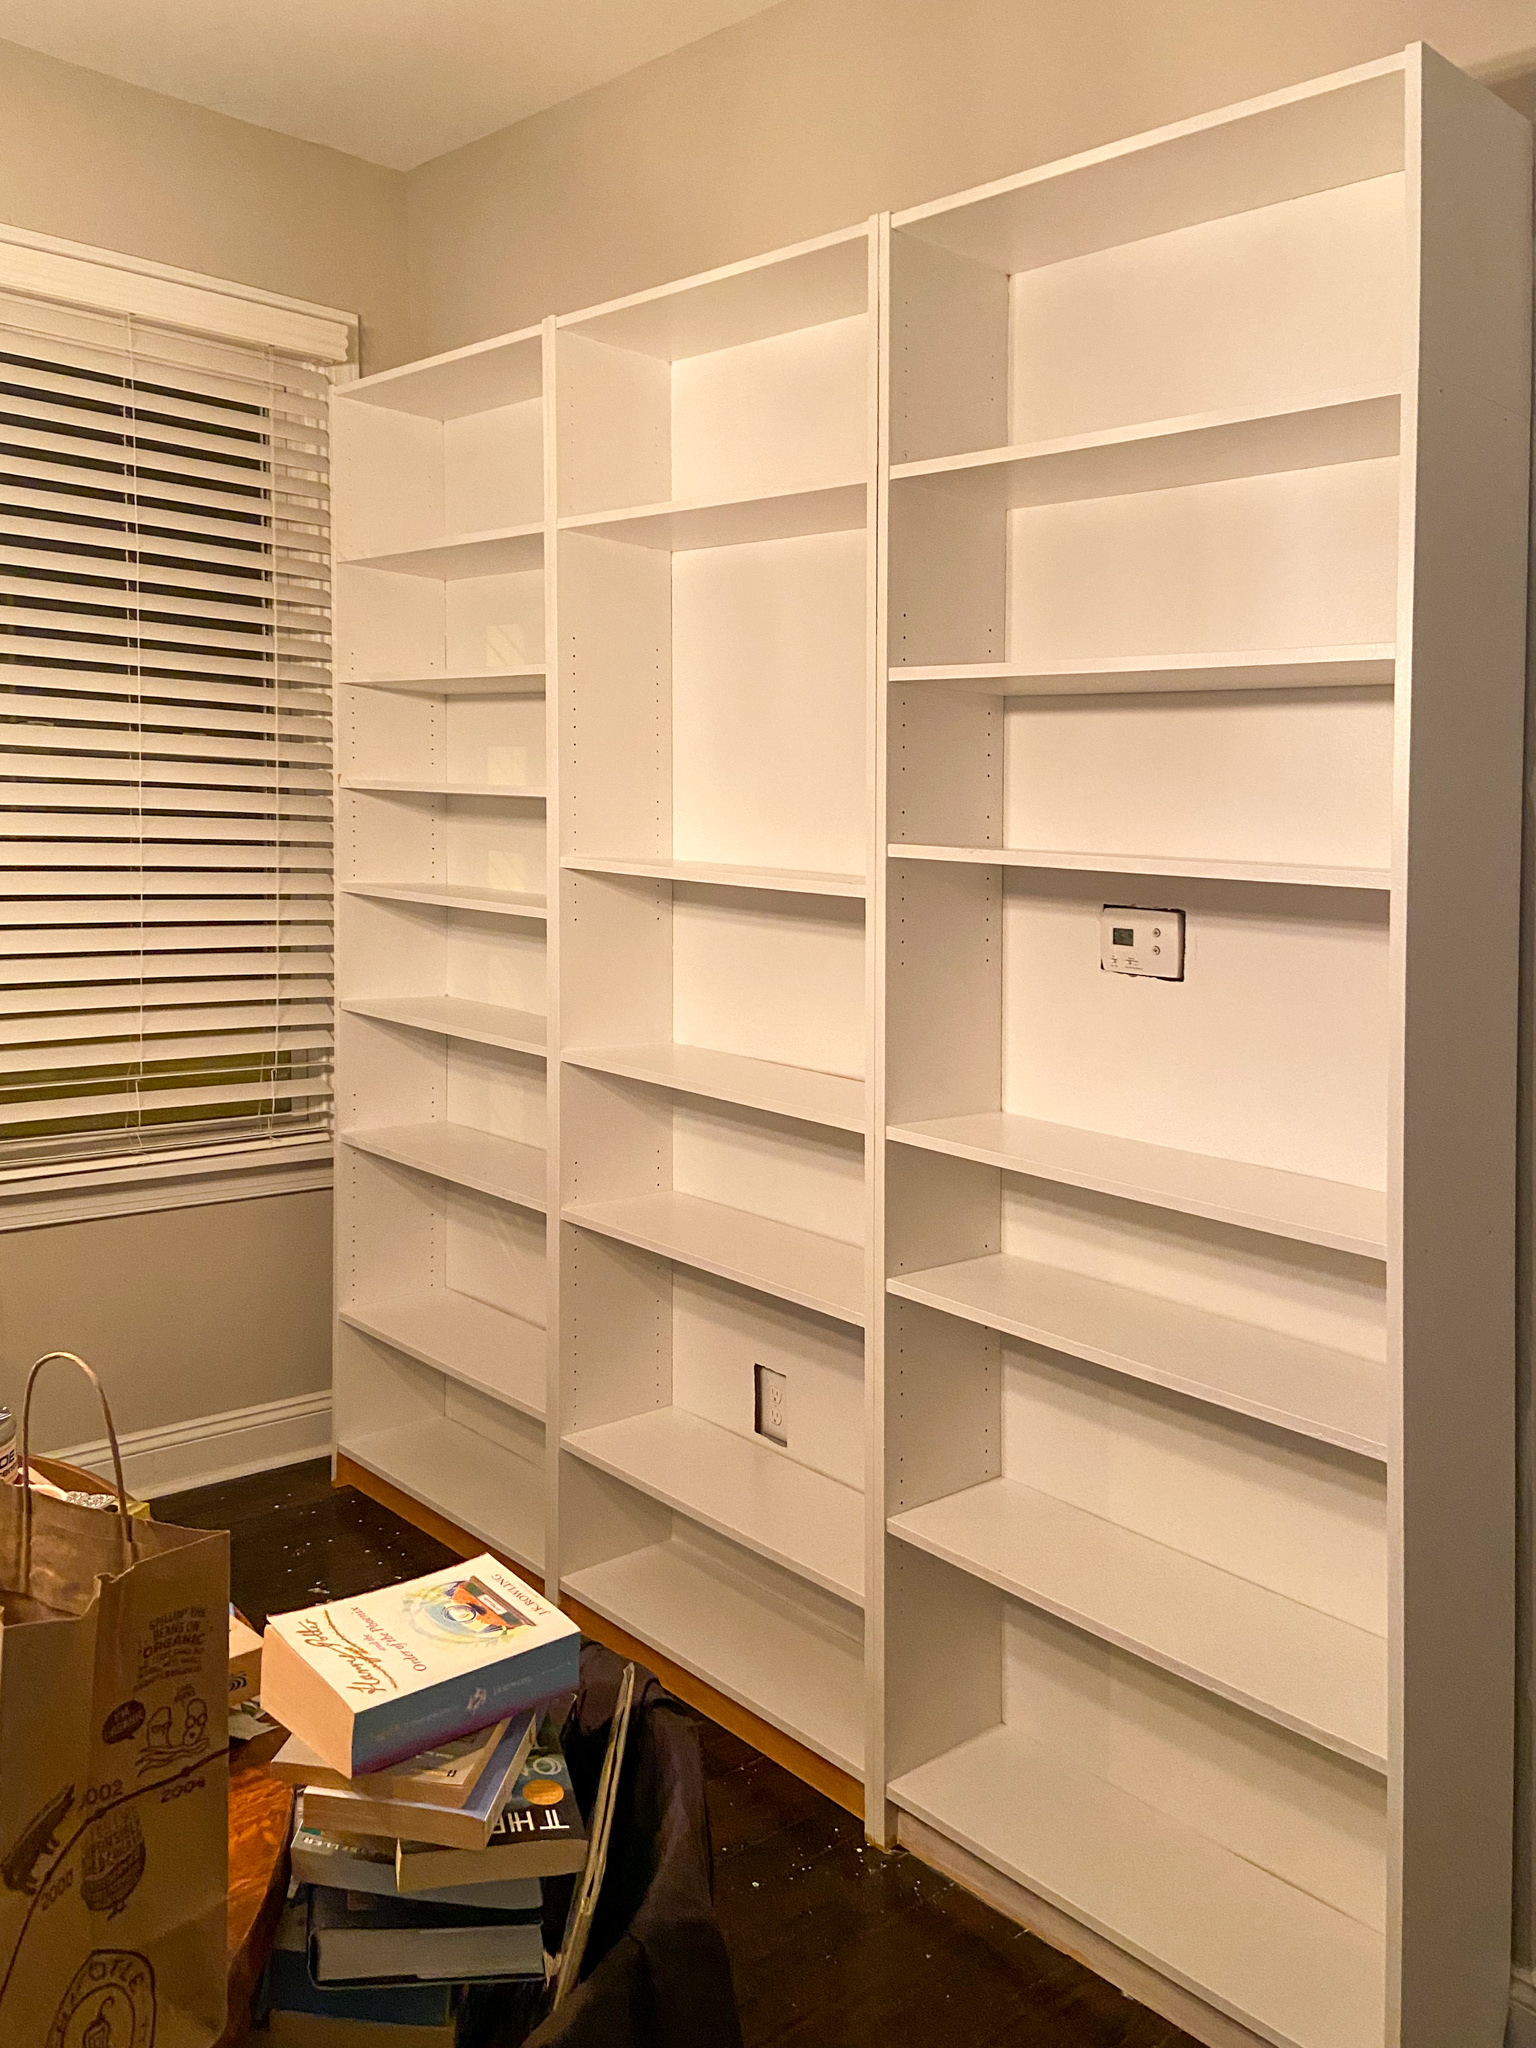 Billy Bookcase Built-Ins IKEA Hack: Part 1 » Statia Gibson